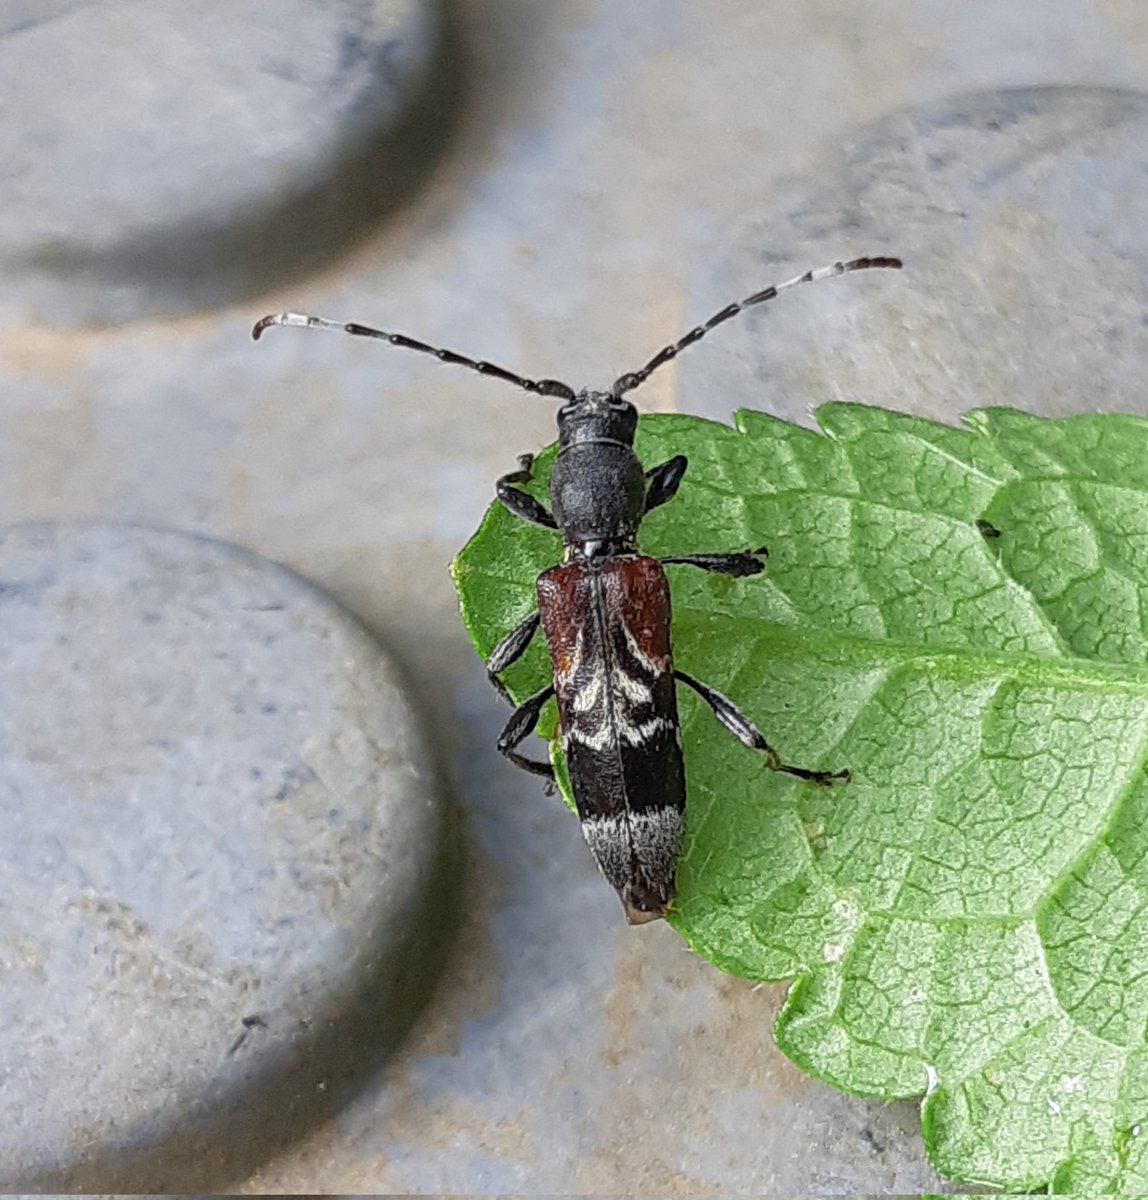 The rather smart Rufous-shouldered Longhorn Beetle (Anagylptus mysticus) rescued from water butt in garden this afternoon. My good deed for the day! 😁 @Buzz_dont_tweet @ColSocBI @LincsNaturalist @LincsWildlife